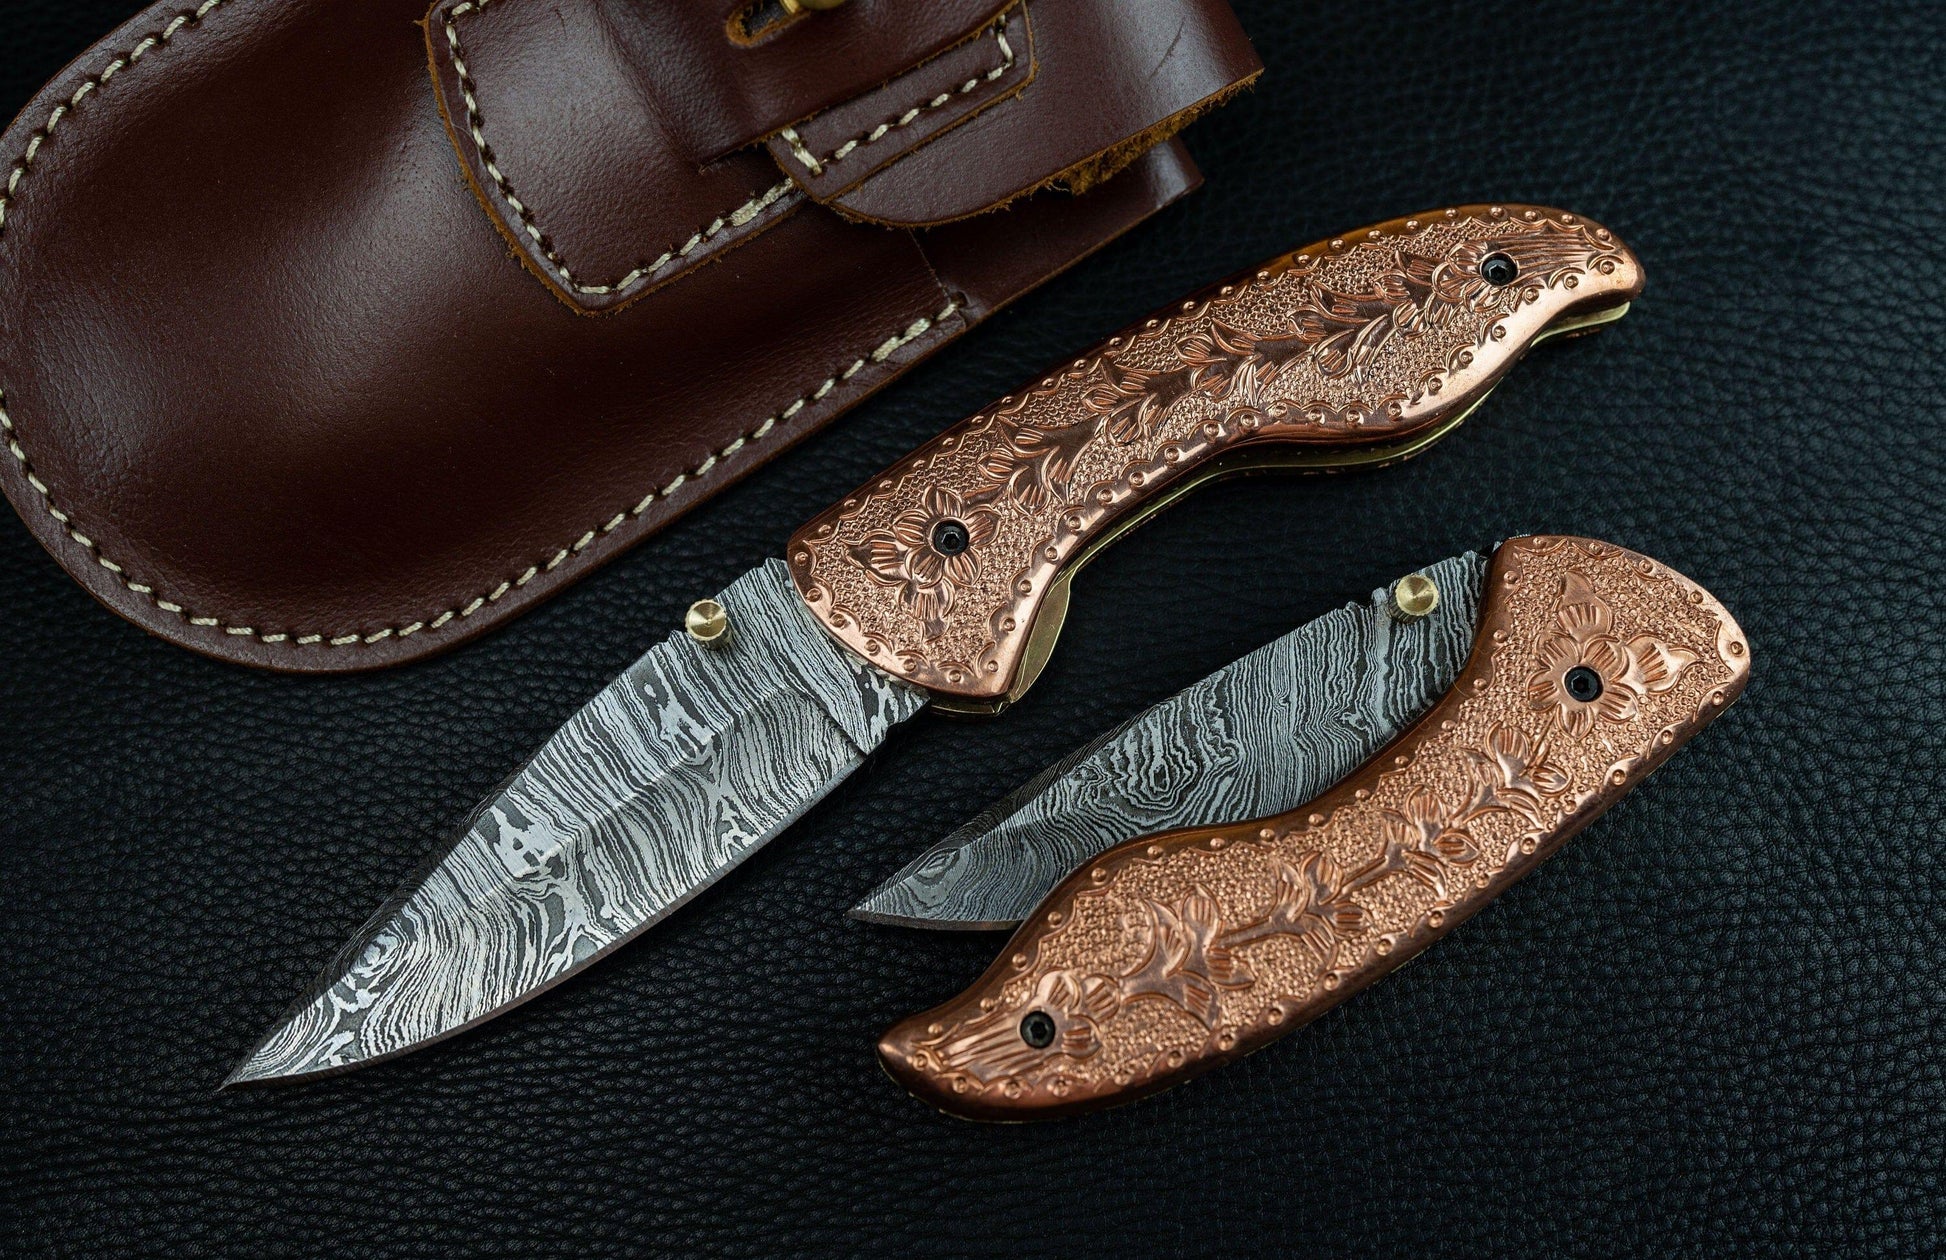 7.5" Hand Forged Engraved Copper Handle Damascus Fold Knife,Hand Made Damascus Pocket Knife, Damascus Steel Hunting knife, Folding Knife Etsy 